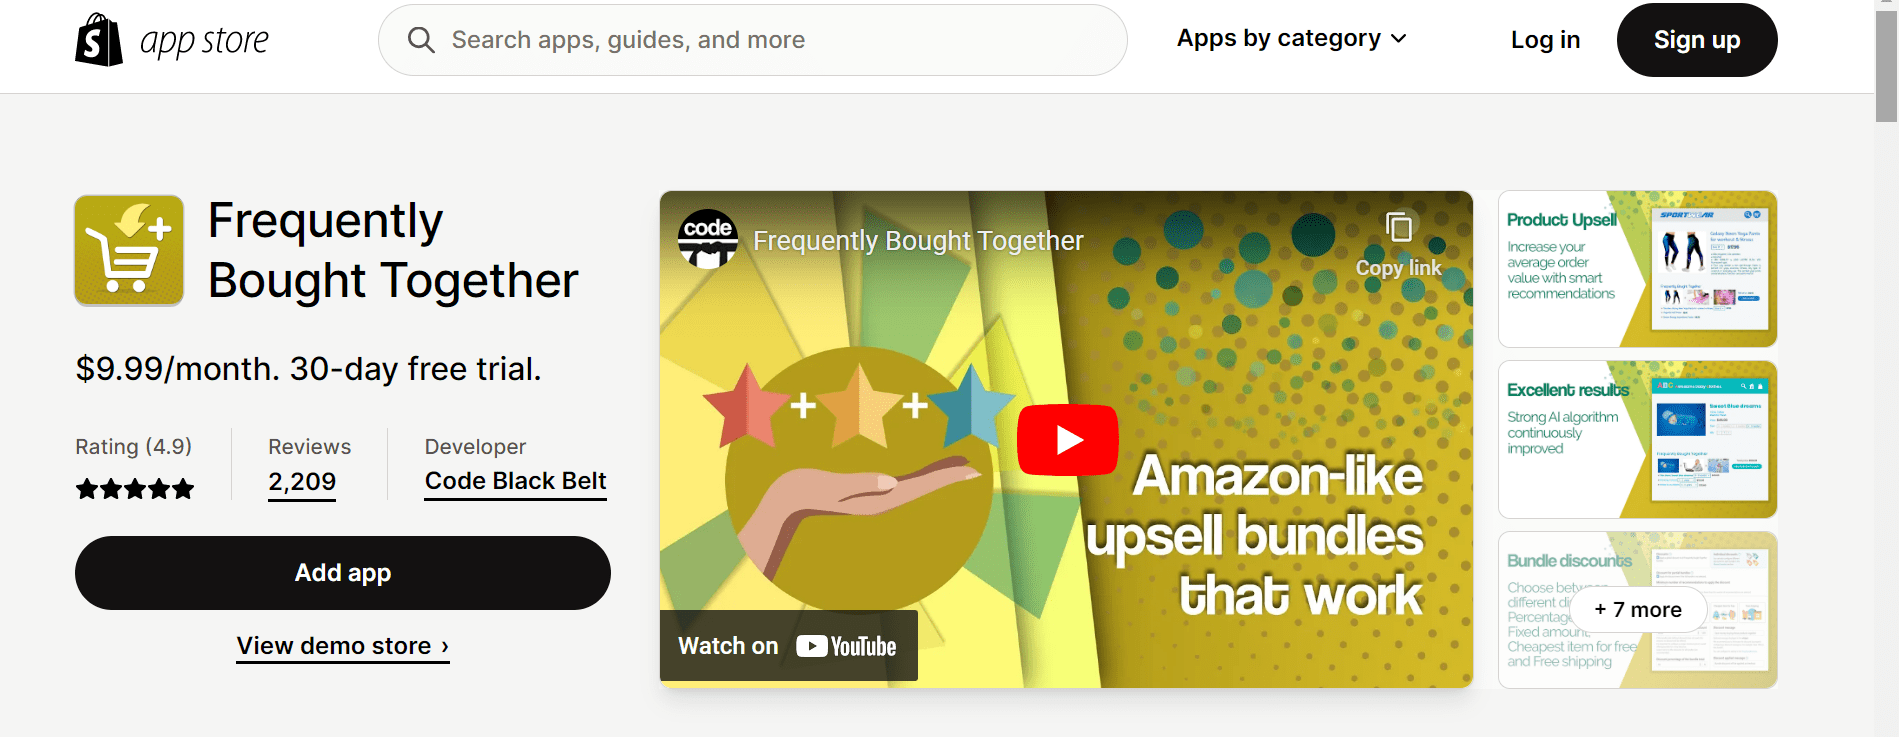 Frequently Bought Together apps